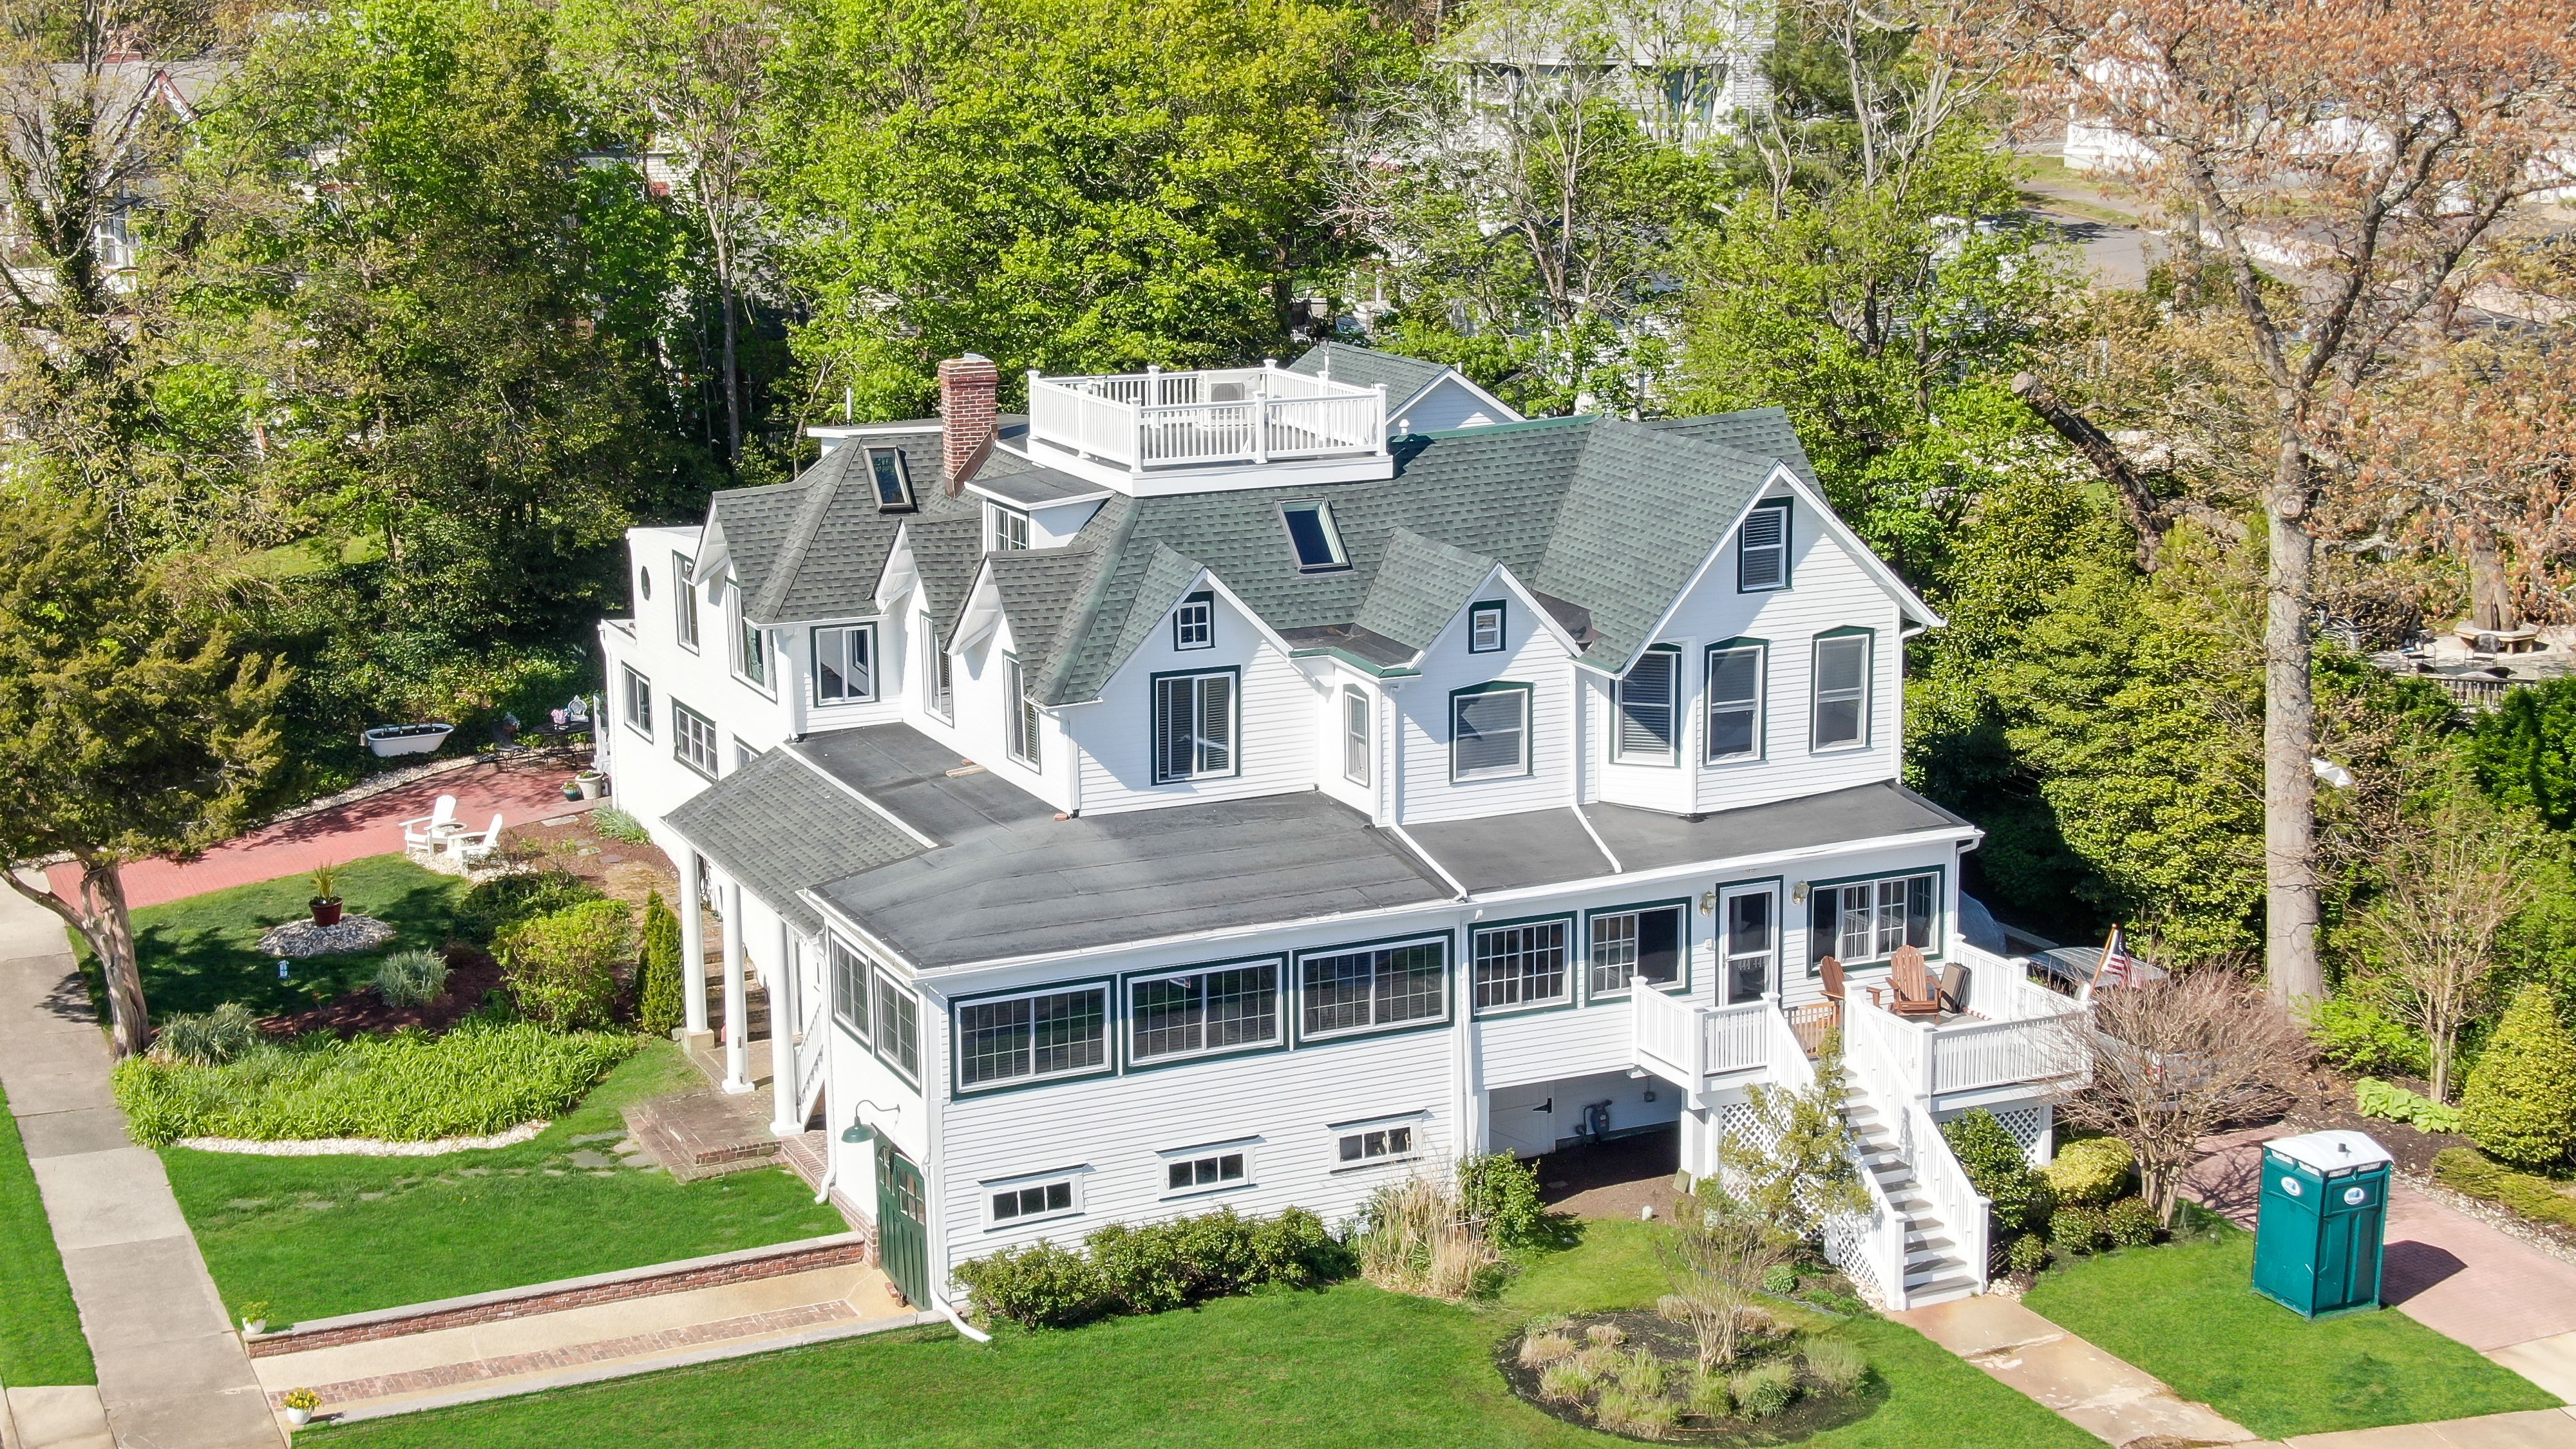 Is It Possible to Raise the Roof on a Cape Cod Home?